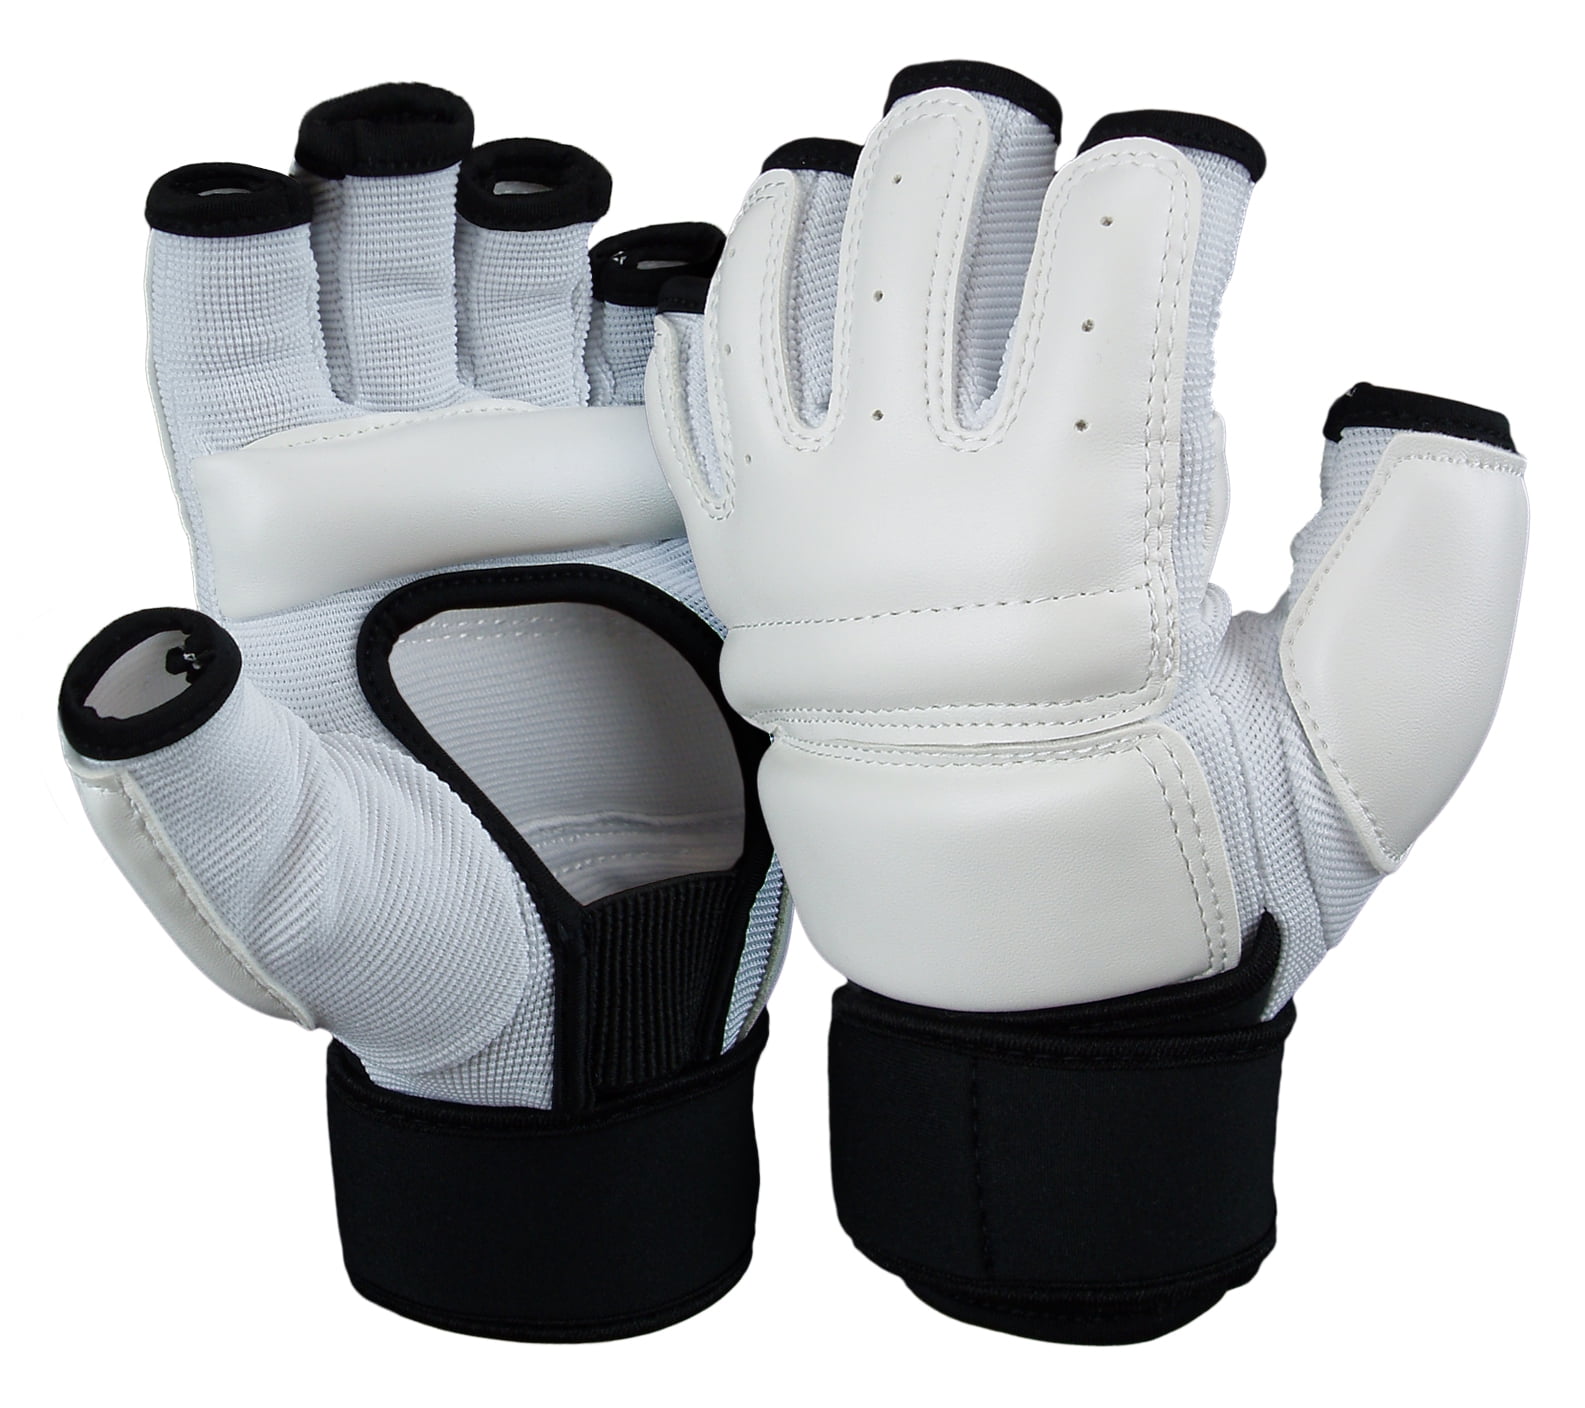 Details about   1 Pair Taekwondo Gloves General Hand Protector Boxing Gloves Practice Device 